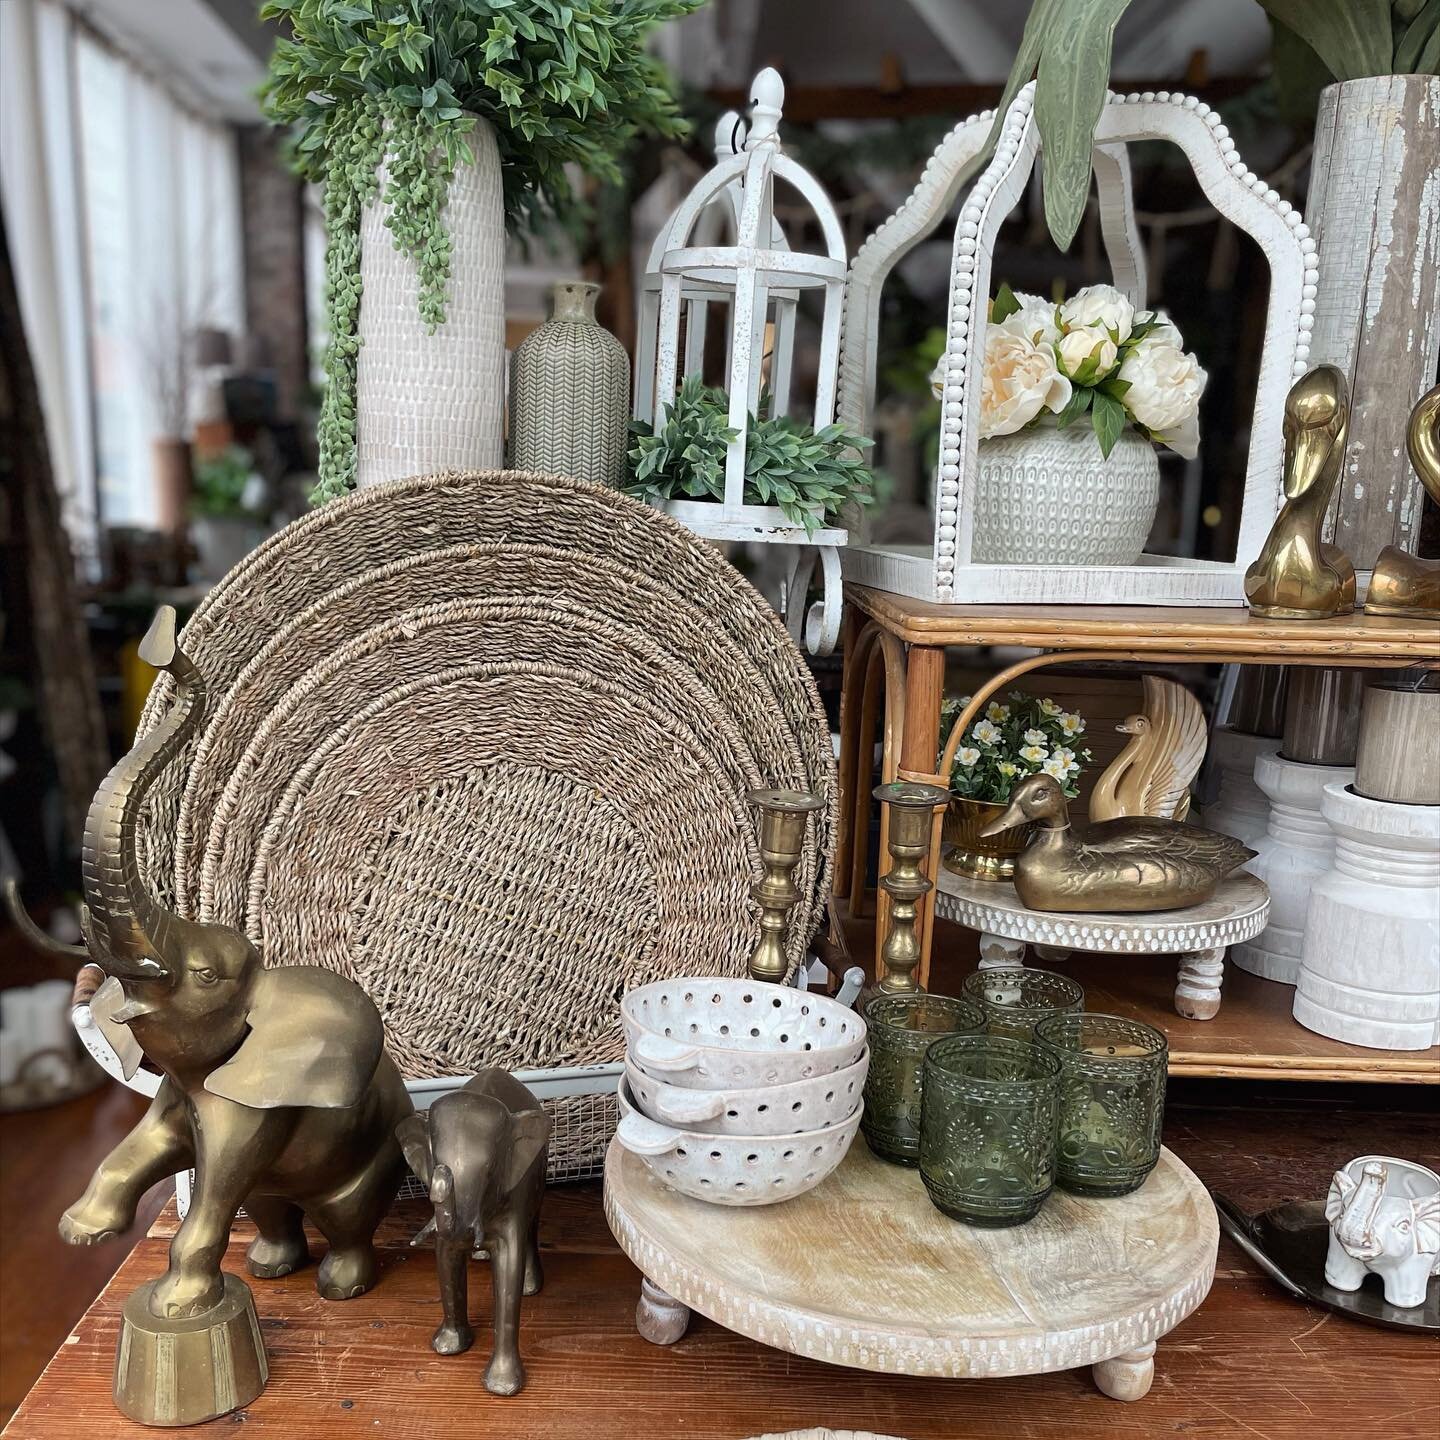 Good morning friends happy Friday!!! Here&rsquo;s another look at one of the new displays in the store, as I mentioned yesterday, I pulled out a bunch of my favorite vintage brass pieces, some snag one before they gone!! Open today 11-5! #bluebirdhom